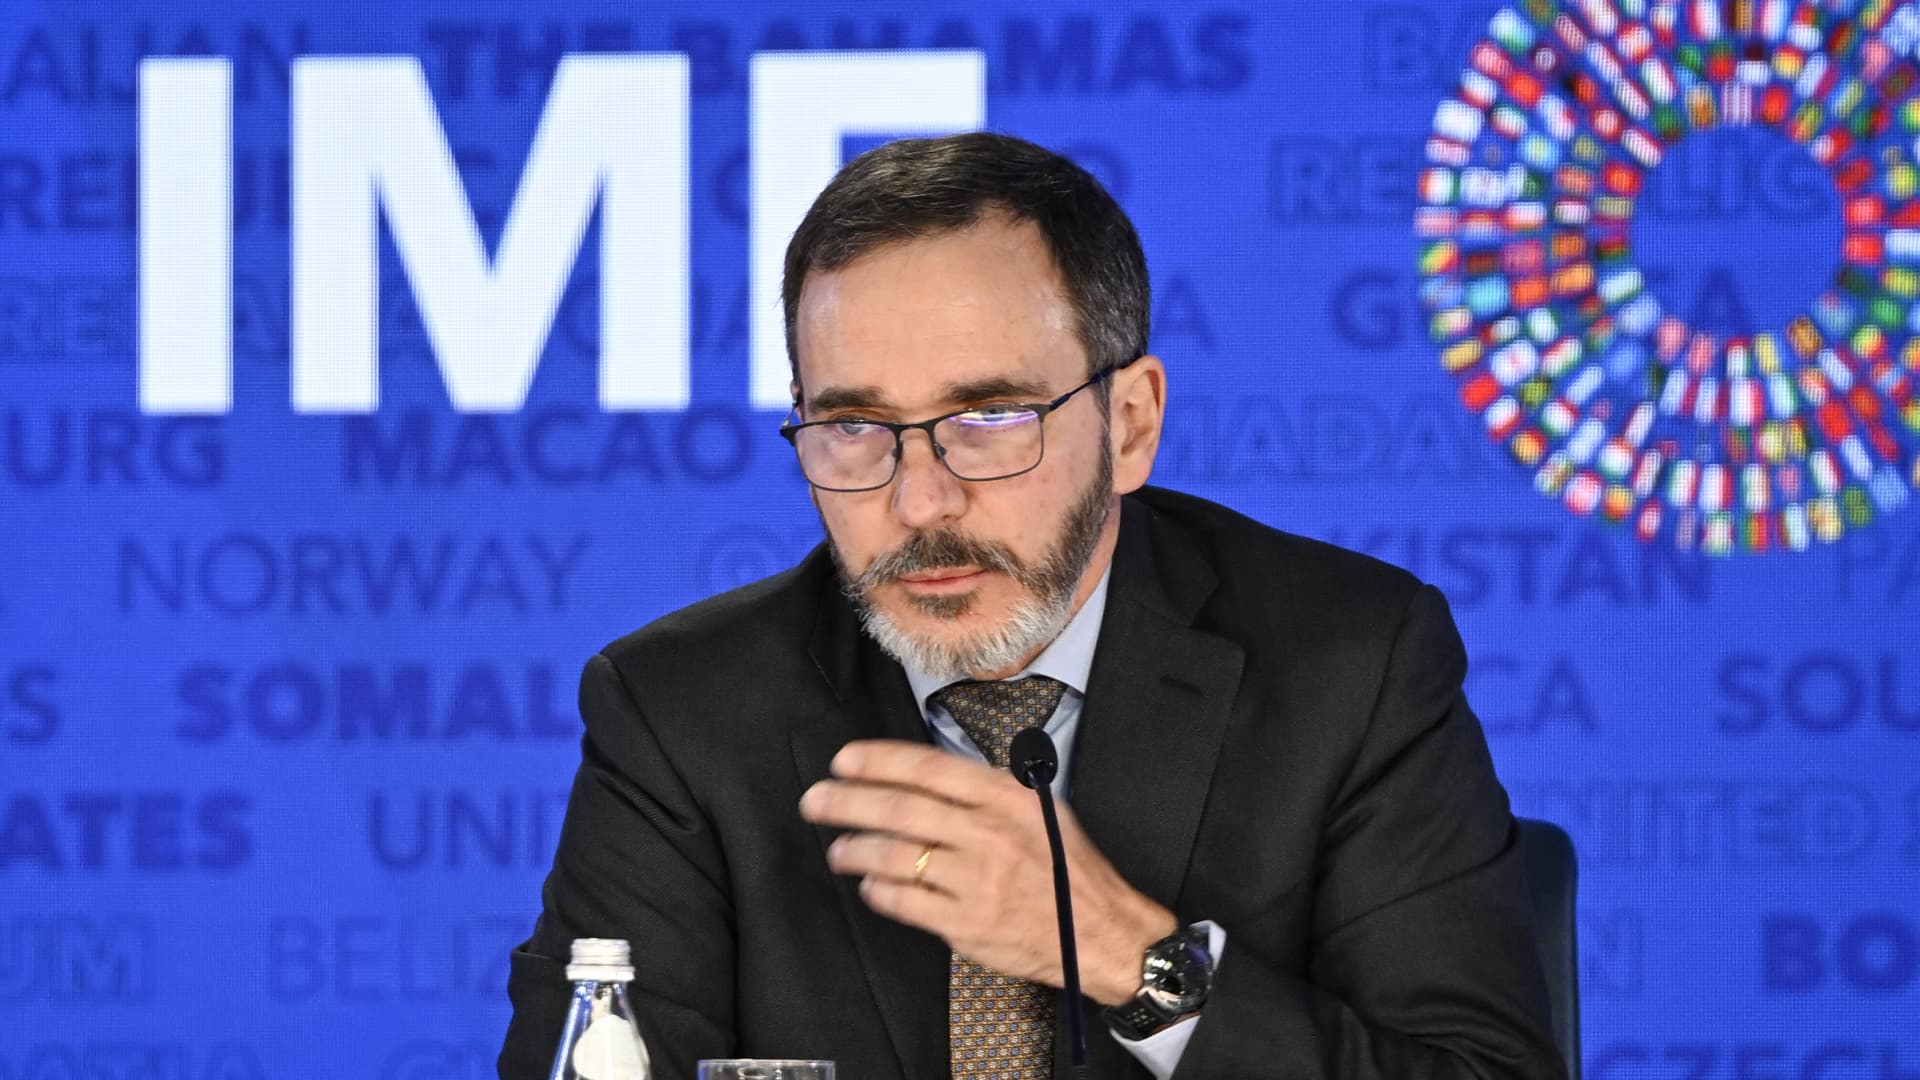 Risk of a global recession is minimal, IMF economist says [Video]